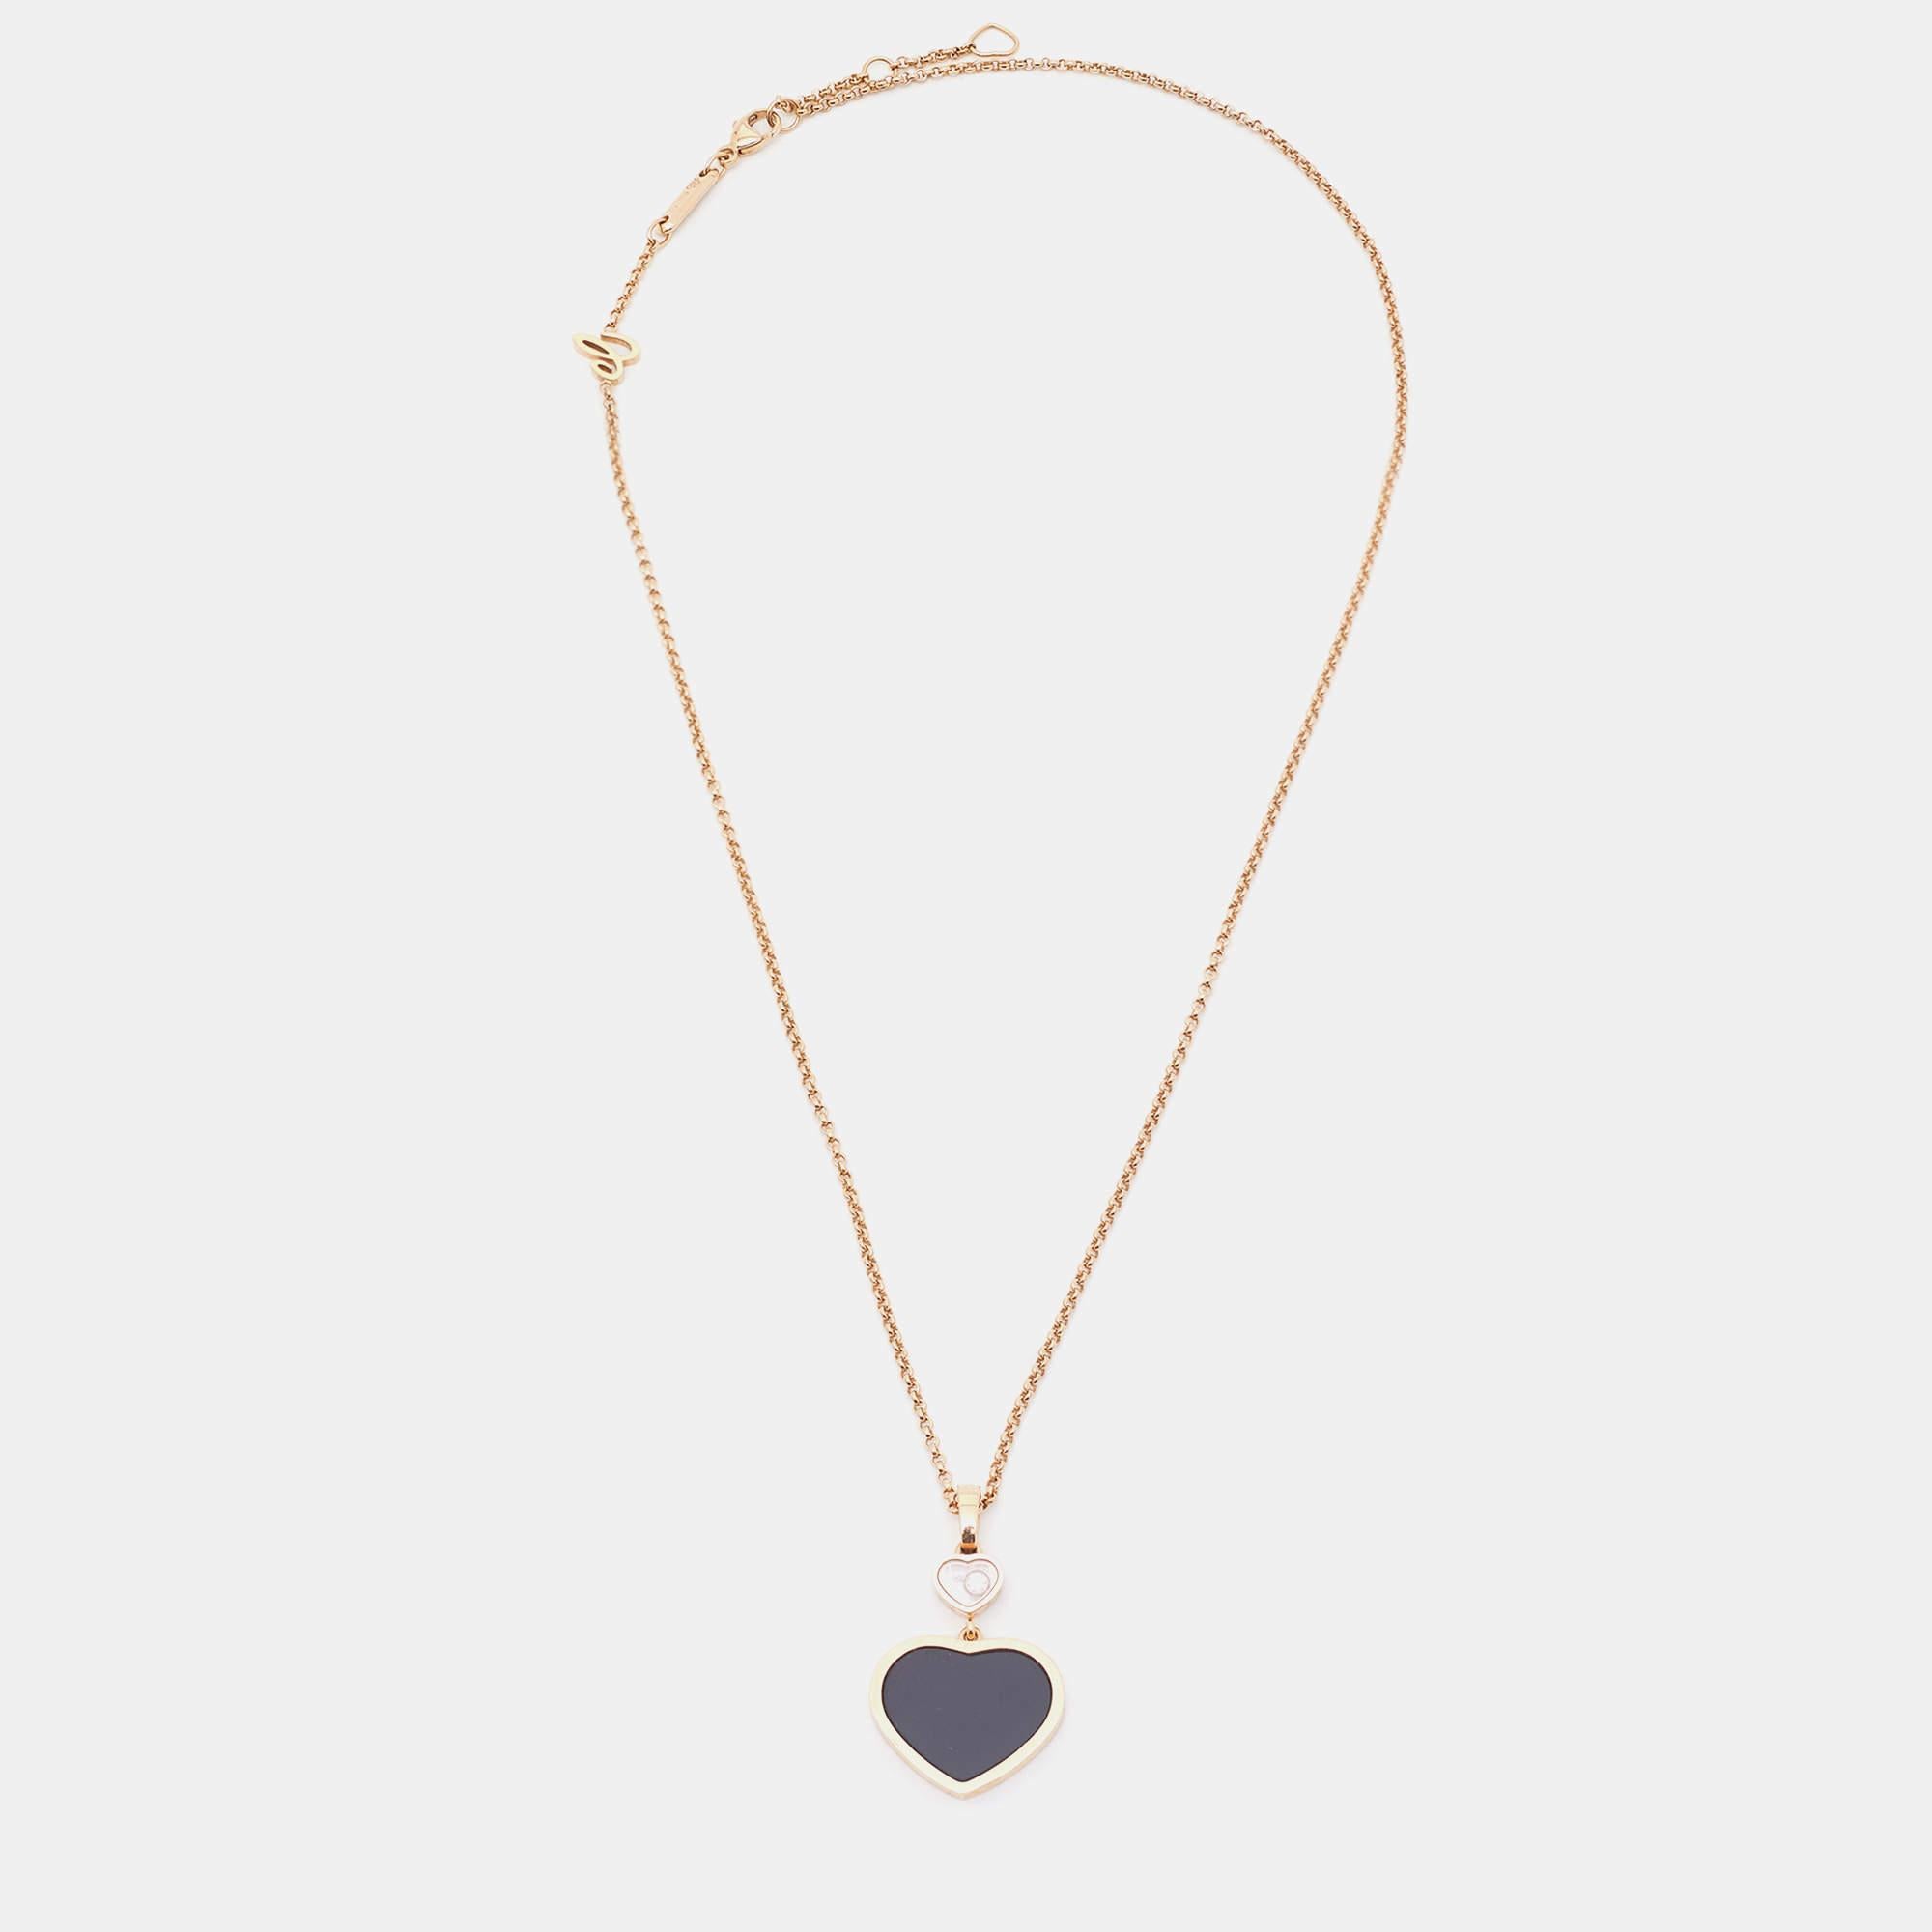 One look at this wondrous necklace from Chopard and our hearts flutter. It is from their Happy Hearts collection and has been created from 18k rose gold to shine. The chain holds two hearts - the larger one is inlaid with onyx and the smaller one